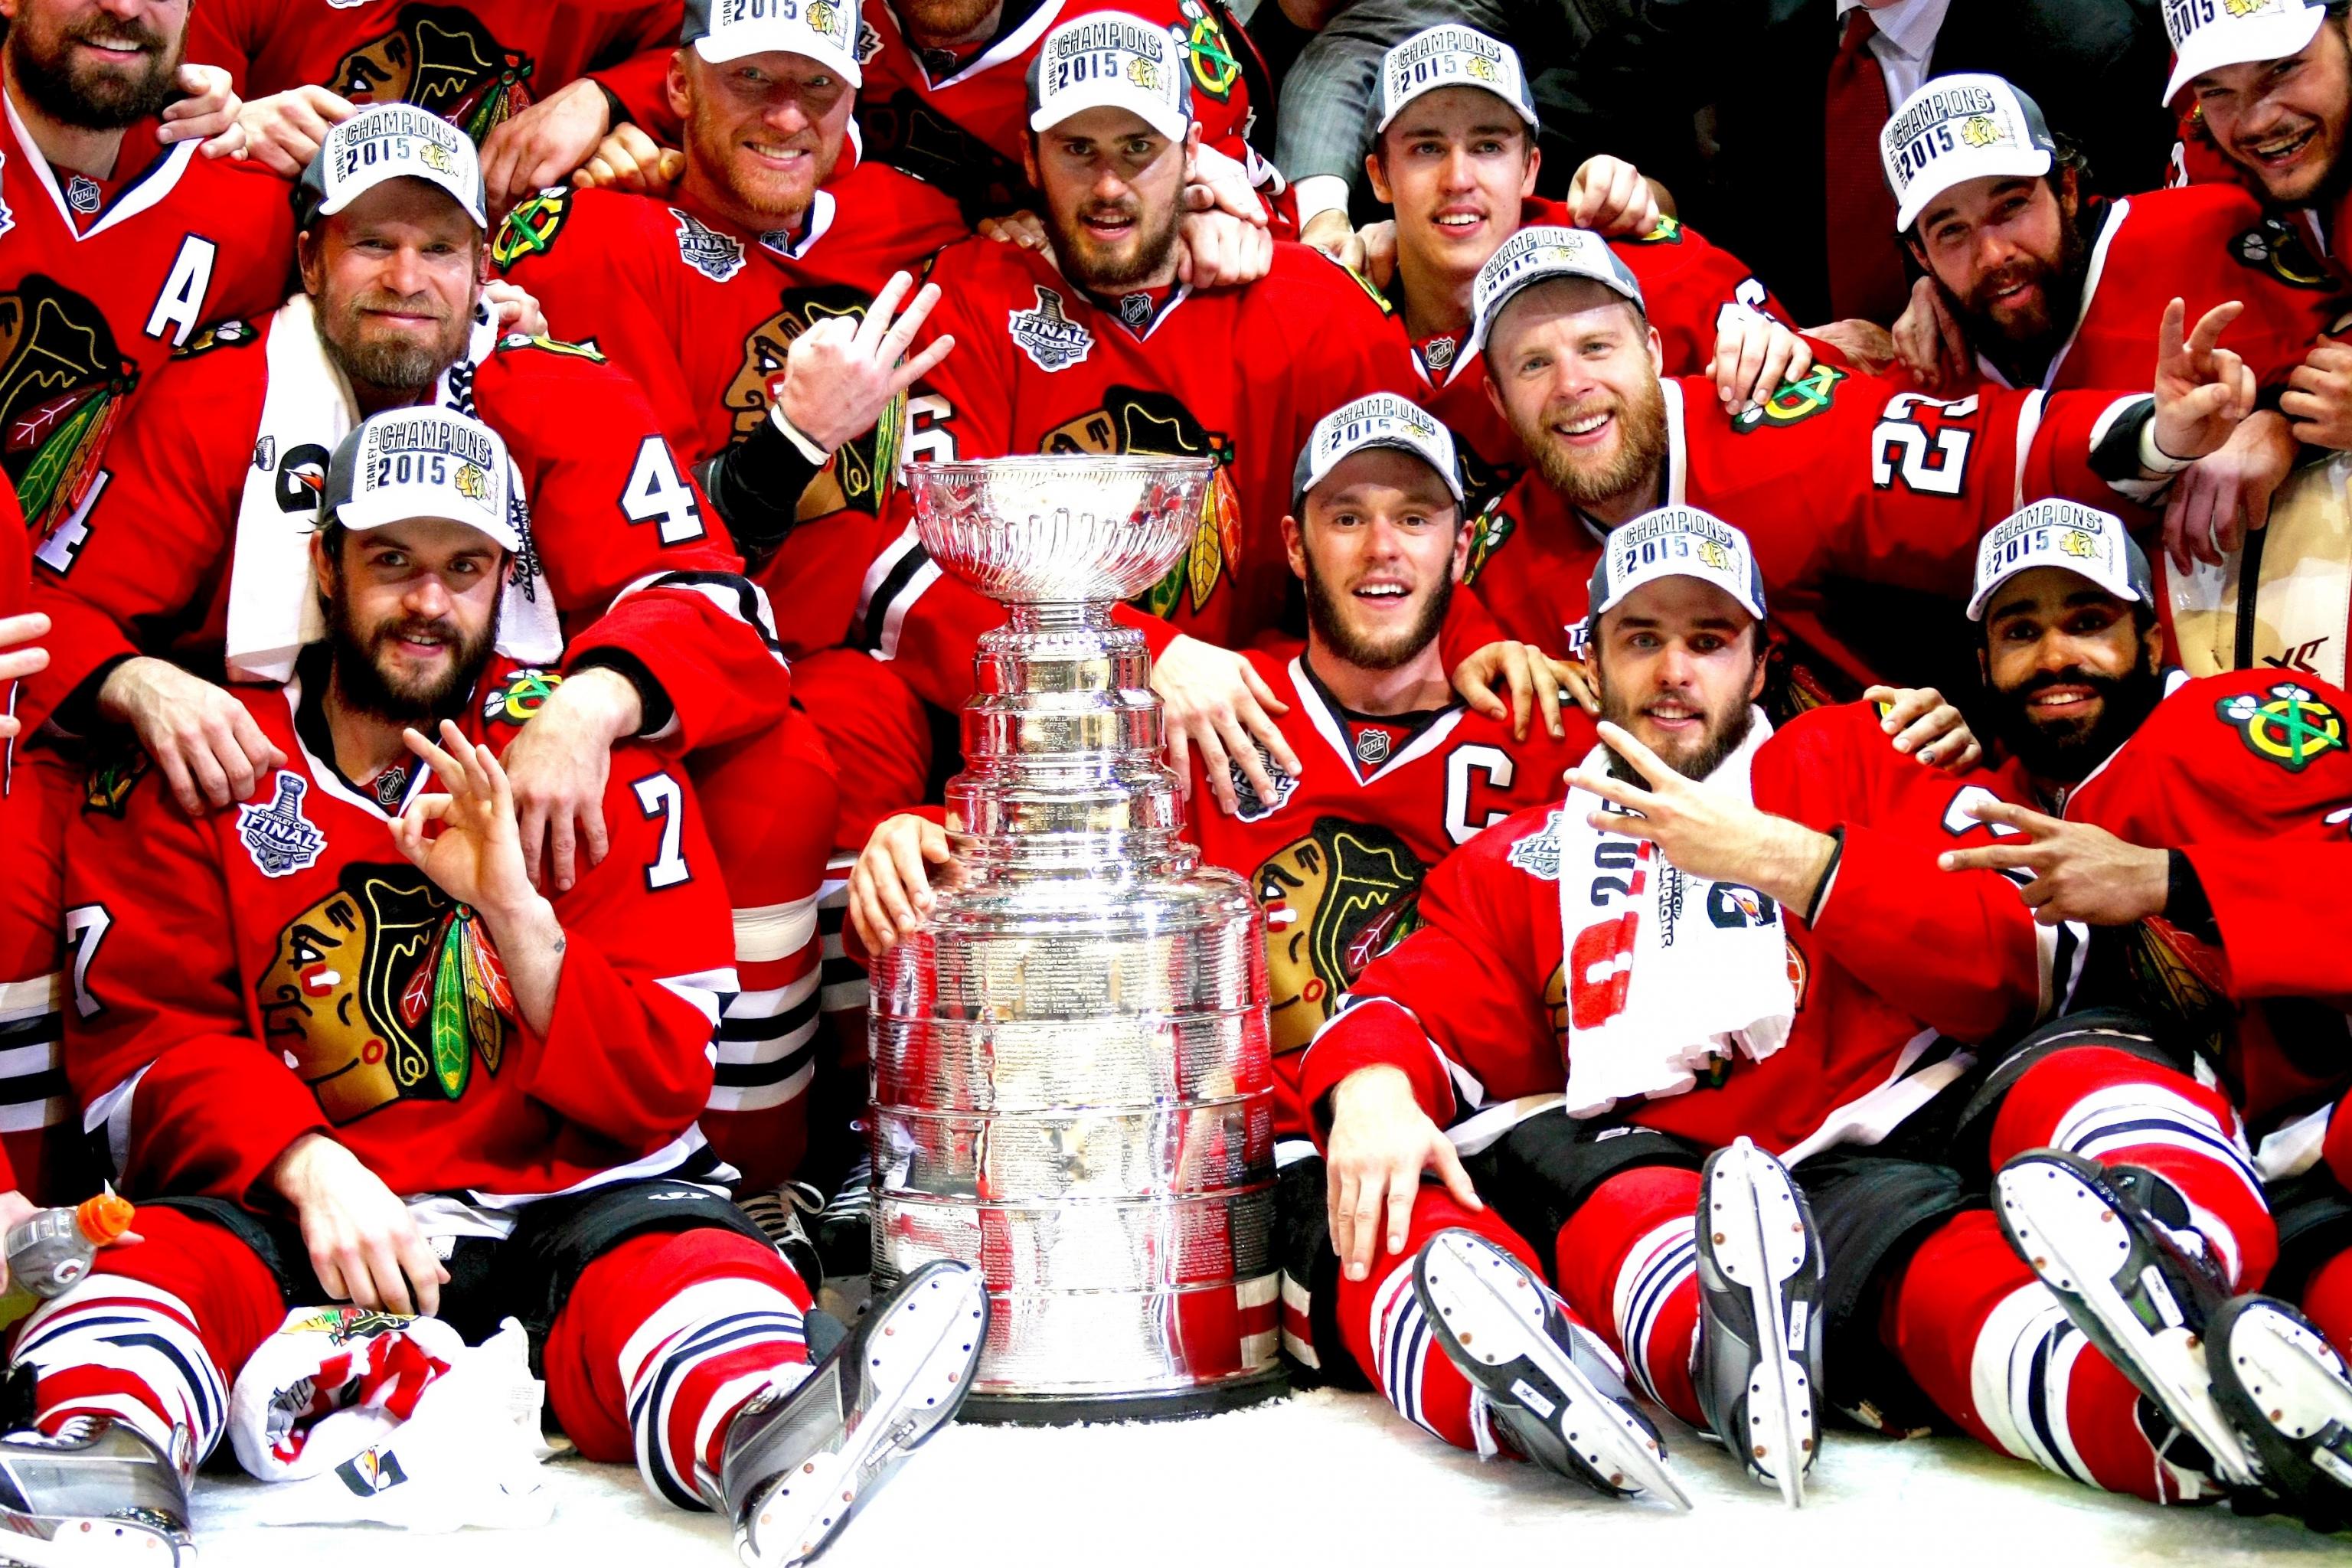 The Blackhawks are NHL champions – and maybe the biggest team in Chicago, Chicago Blackhawks